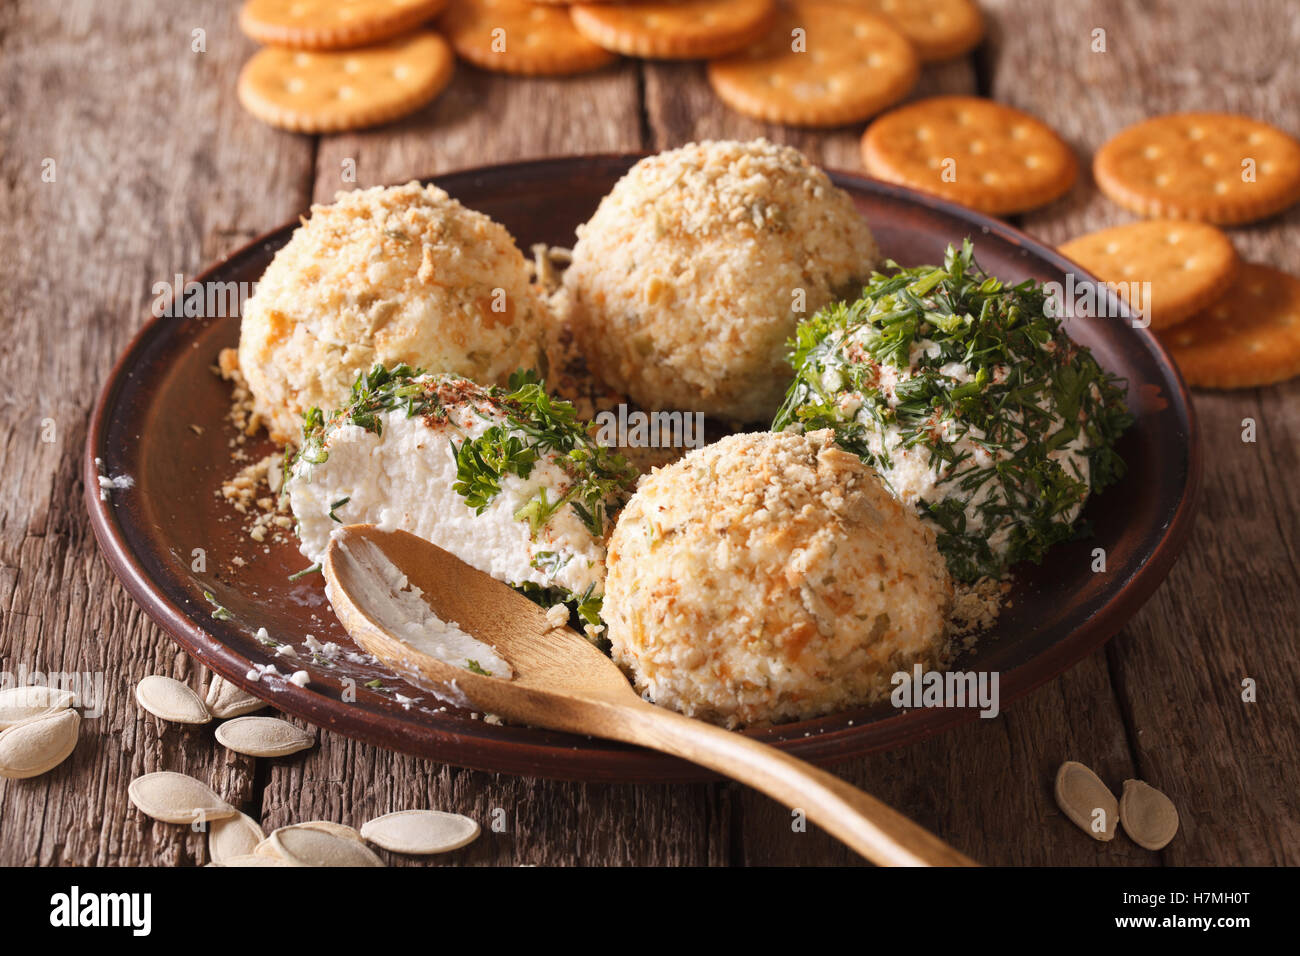 Cottage cheese balls with crackers, herbs and pumpkin seeds close-up on a plate. Horizontal Stock Photo